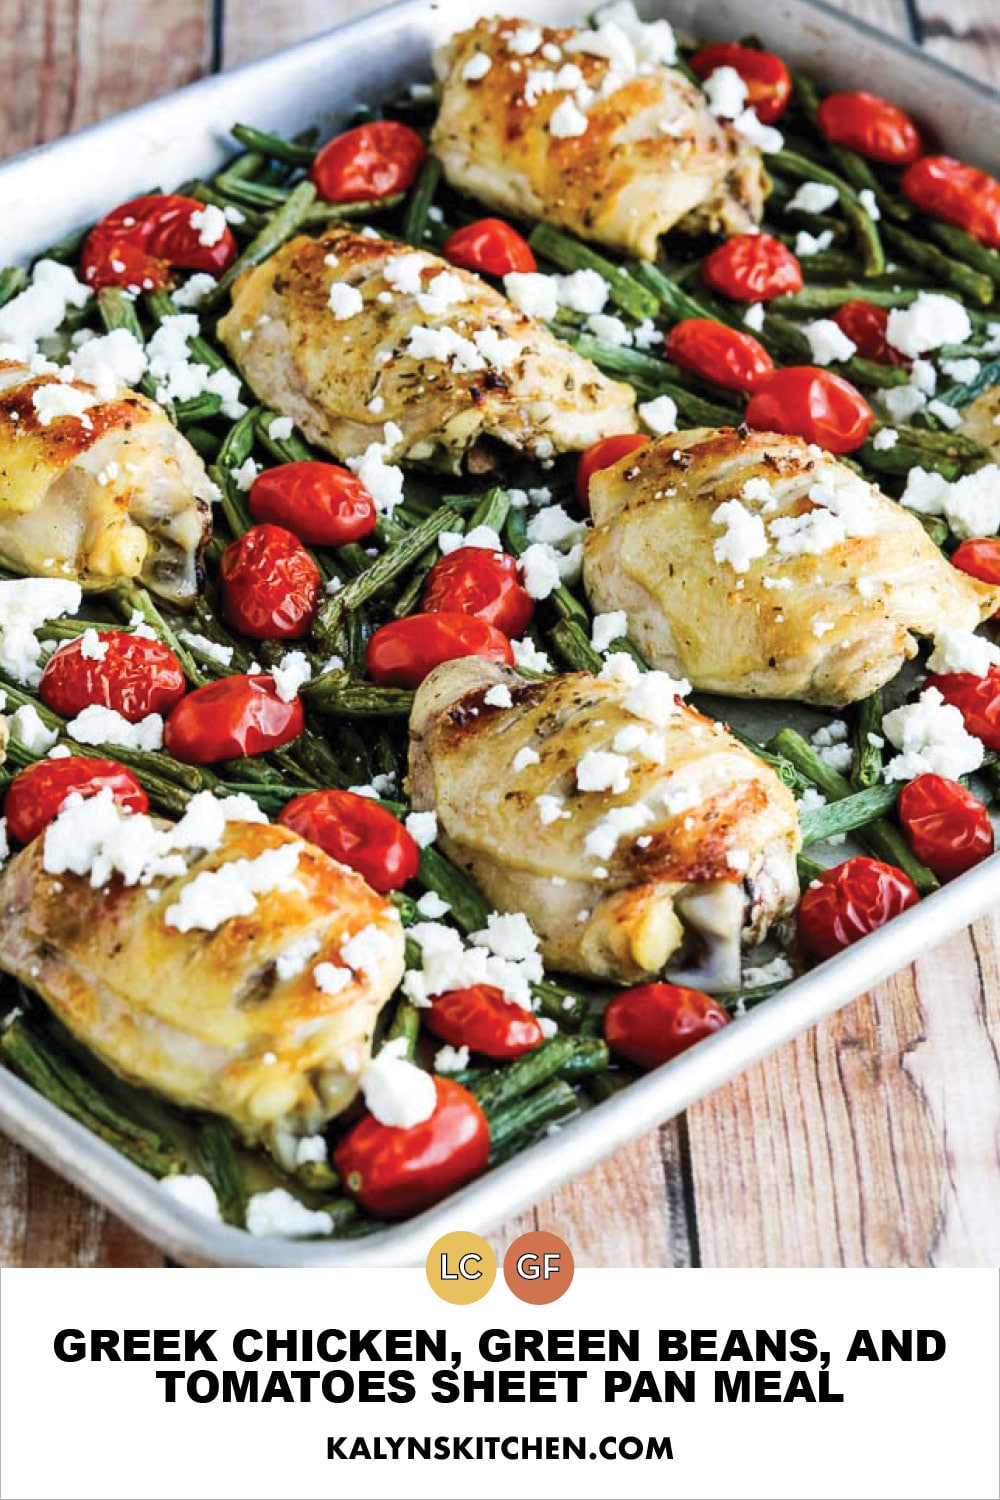 Pinterest image of Greek Chicken, Green Beans, and Tomatoes Sheet Pan Meal 